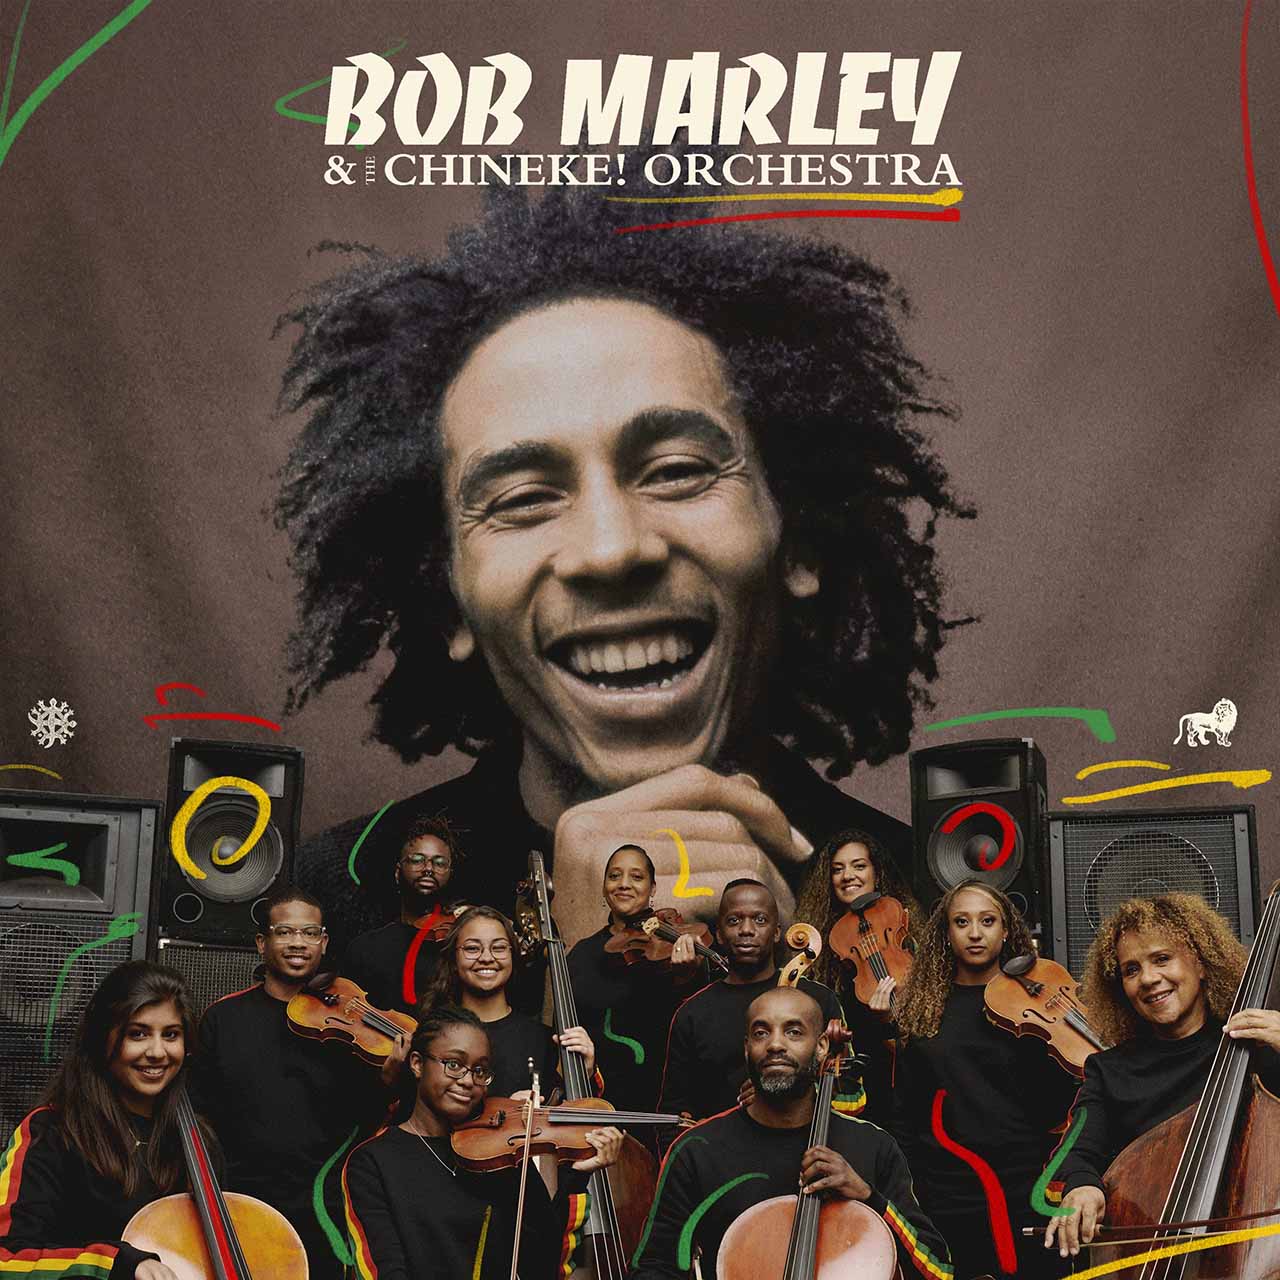 Bob Marley & The Chineke! Orchestra' Album Set For Release In May